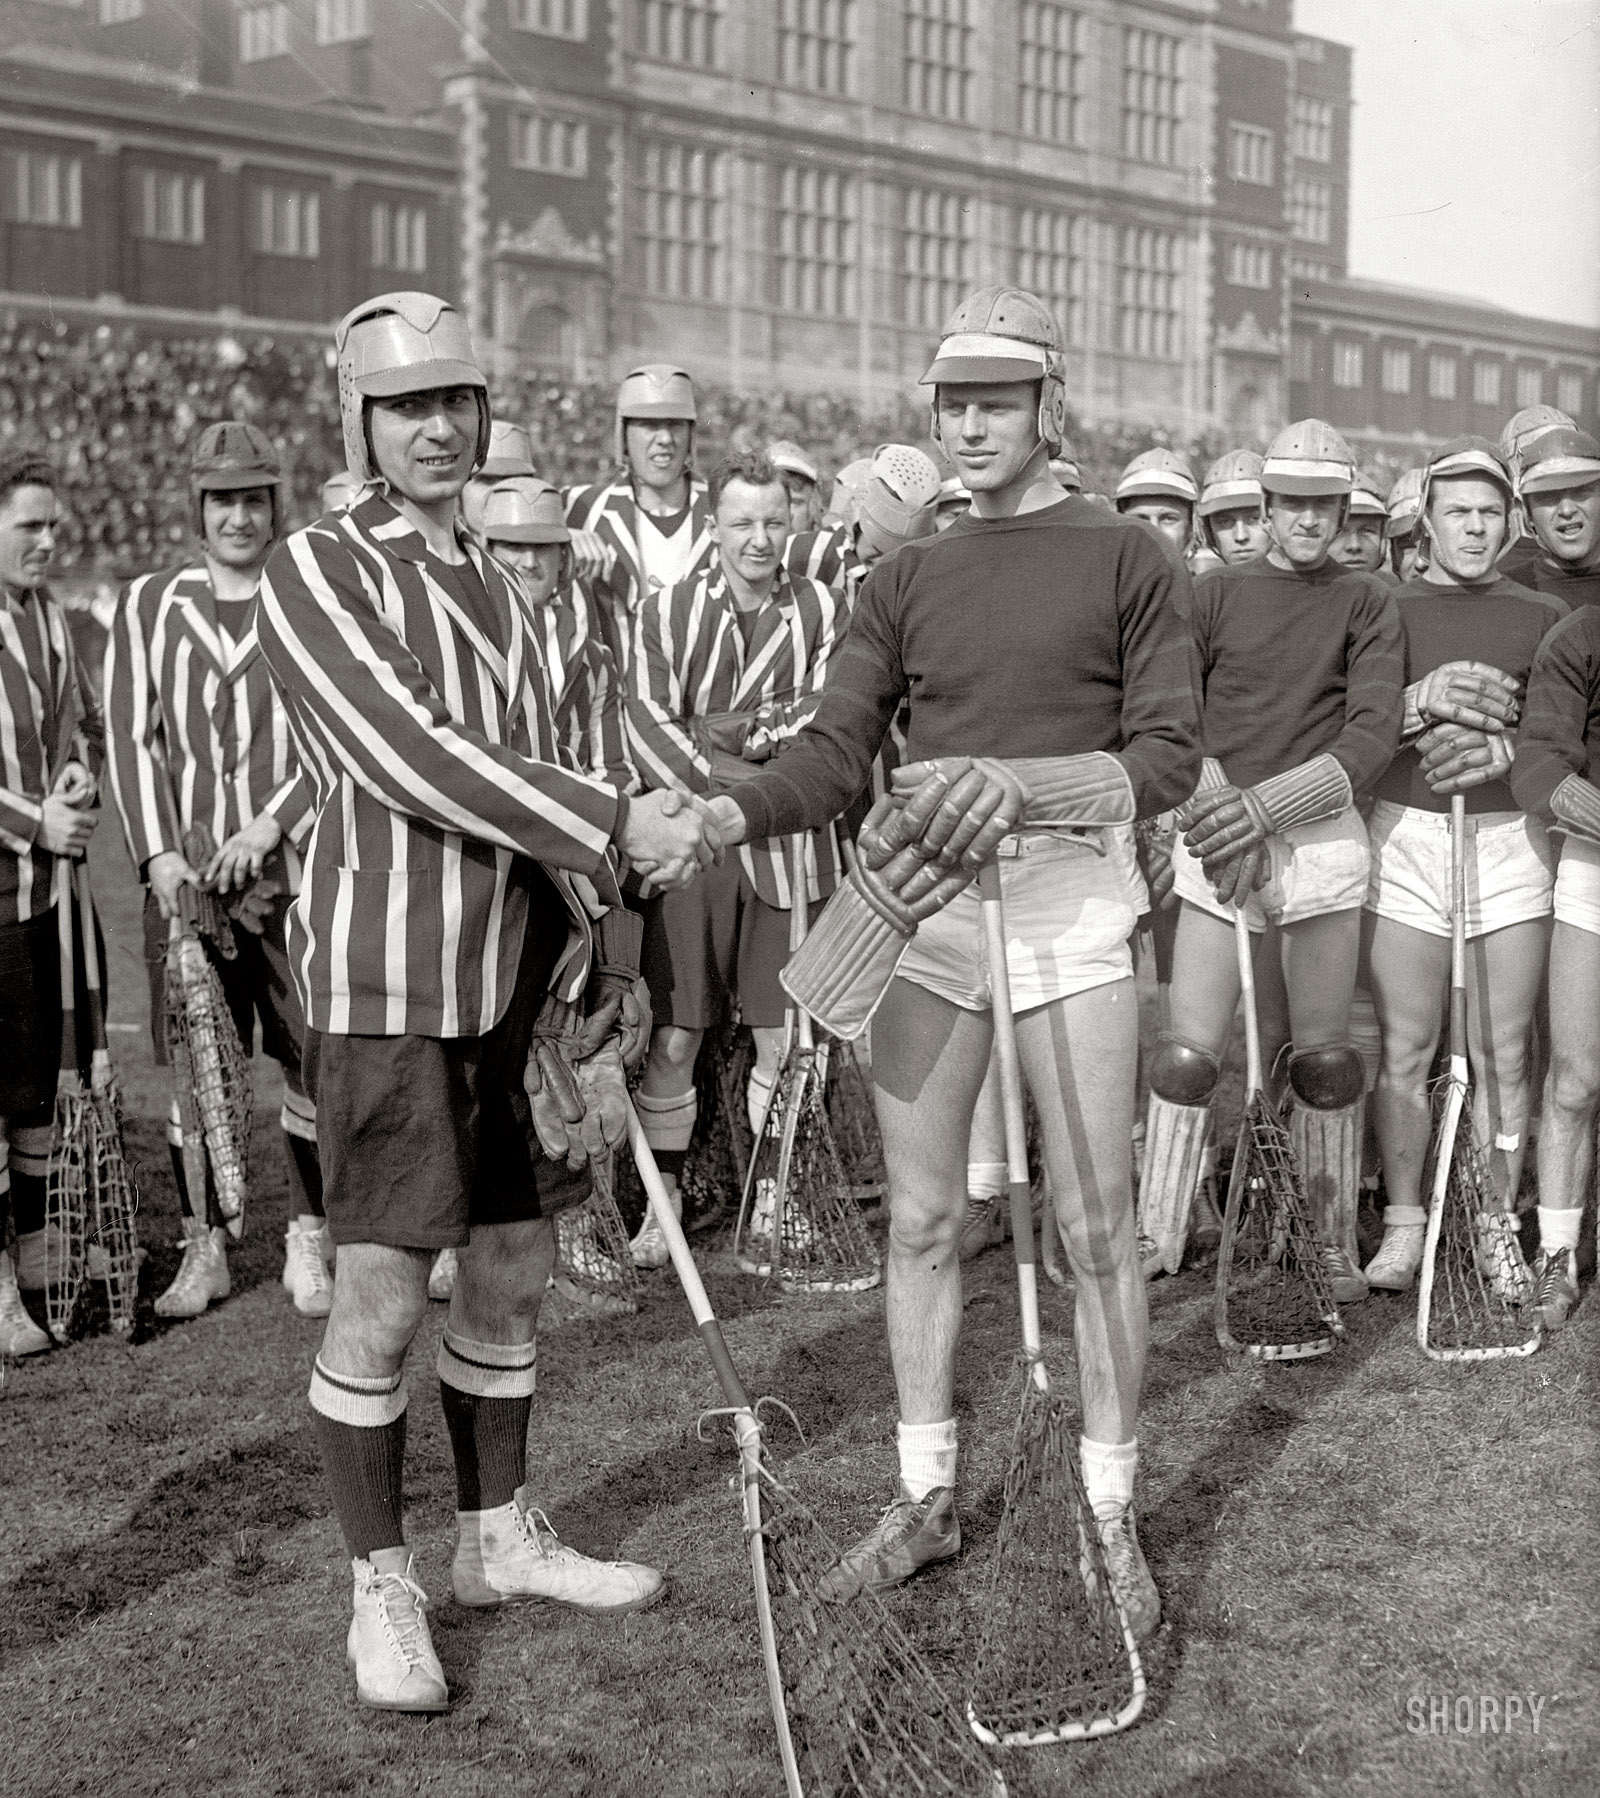 Washington, D.C., circa 1930. "Lacrosse, Central Stadium." Teams unknown; perhaps someone out there can fill us in. Contest to be decided: Most Outstanding Uniform. National Photo Company Collection glass negative. View full size.